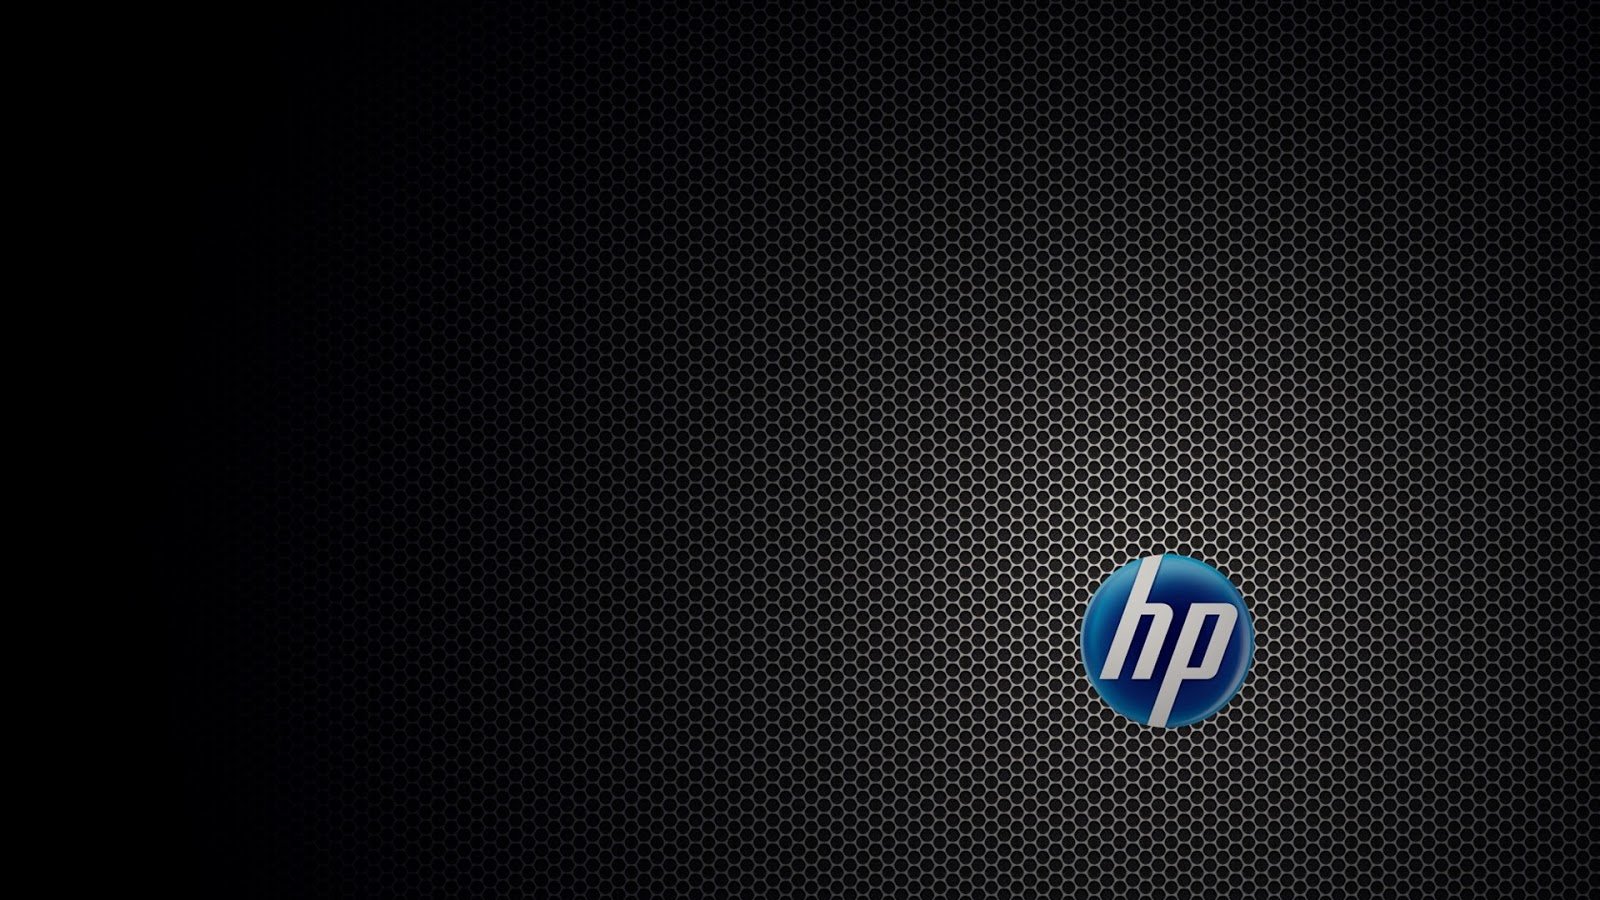 Hp Backgrounds Wallpapers Hd Wallpapers Apps Directories